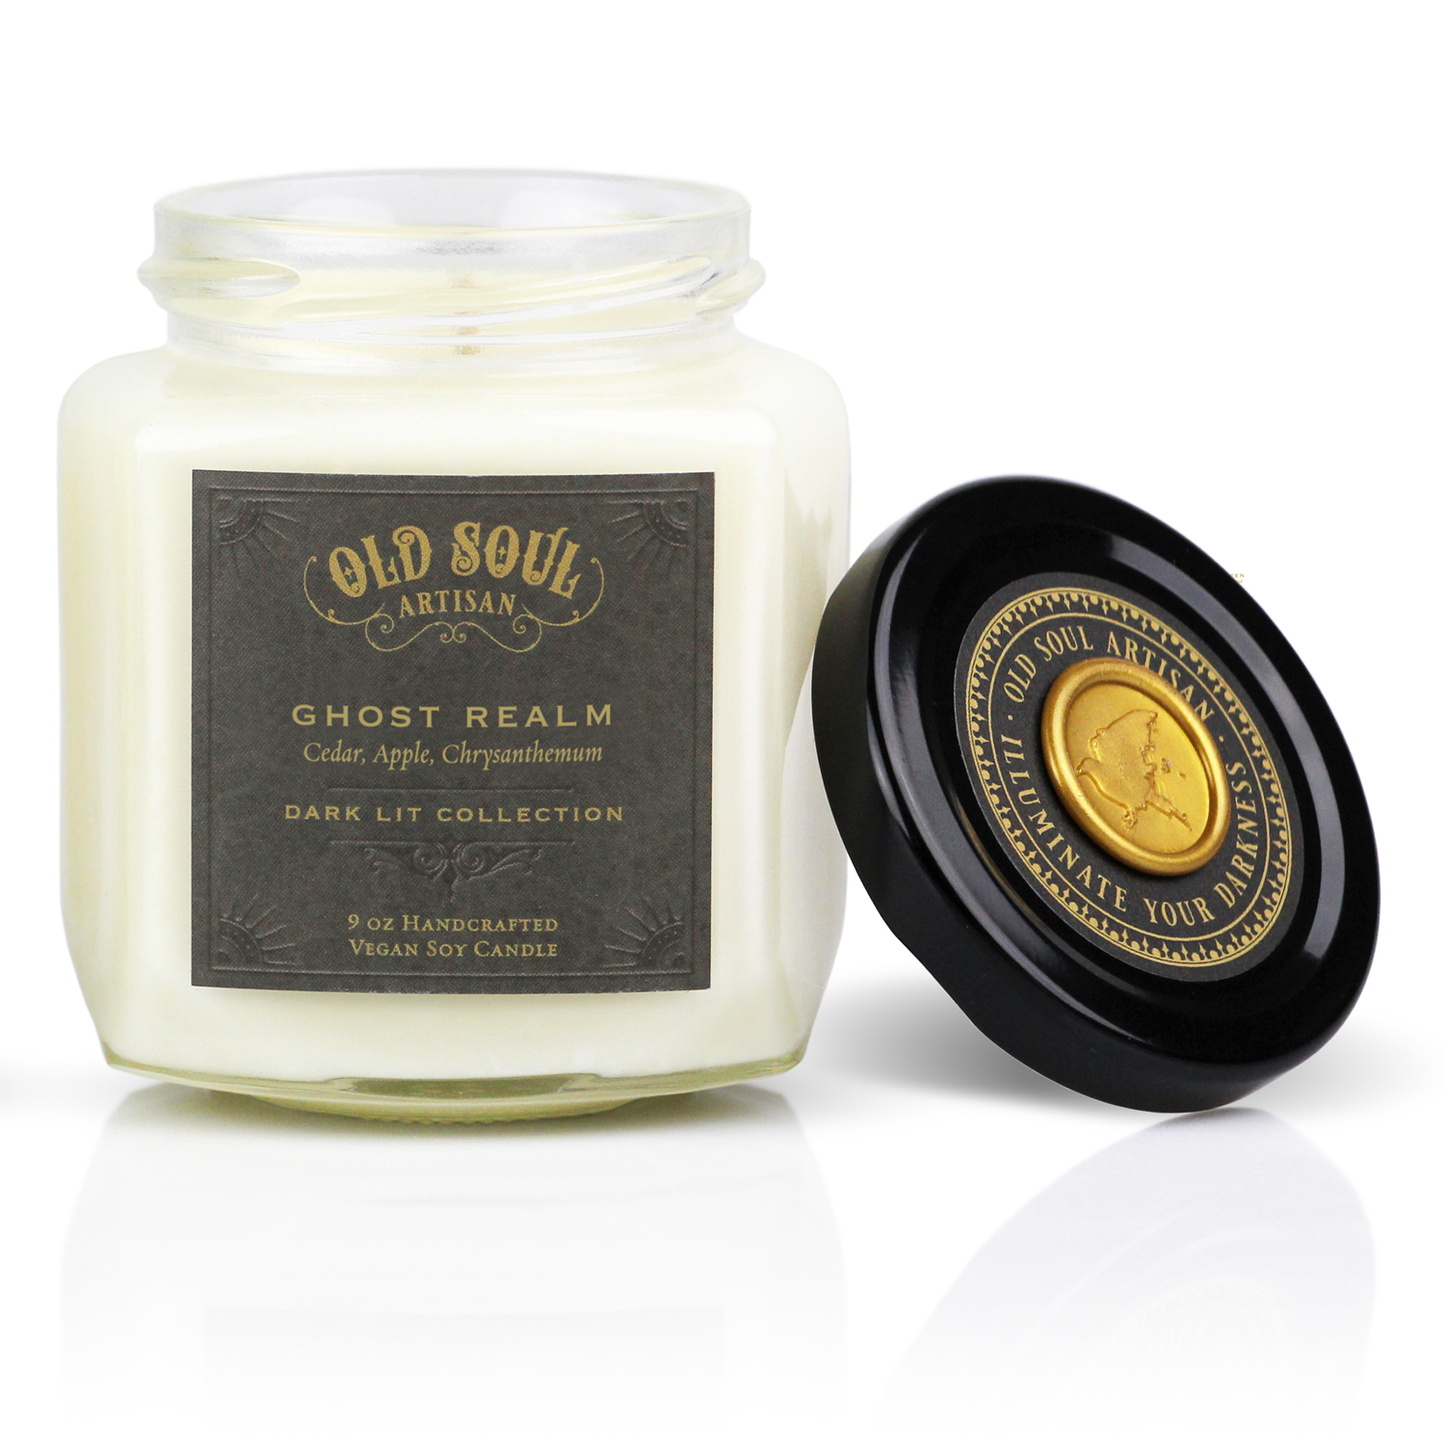 Ghost Realm - 9oz Soy Candle - Fantasy Literature Inspired